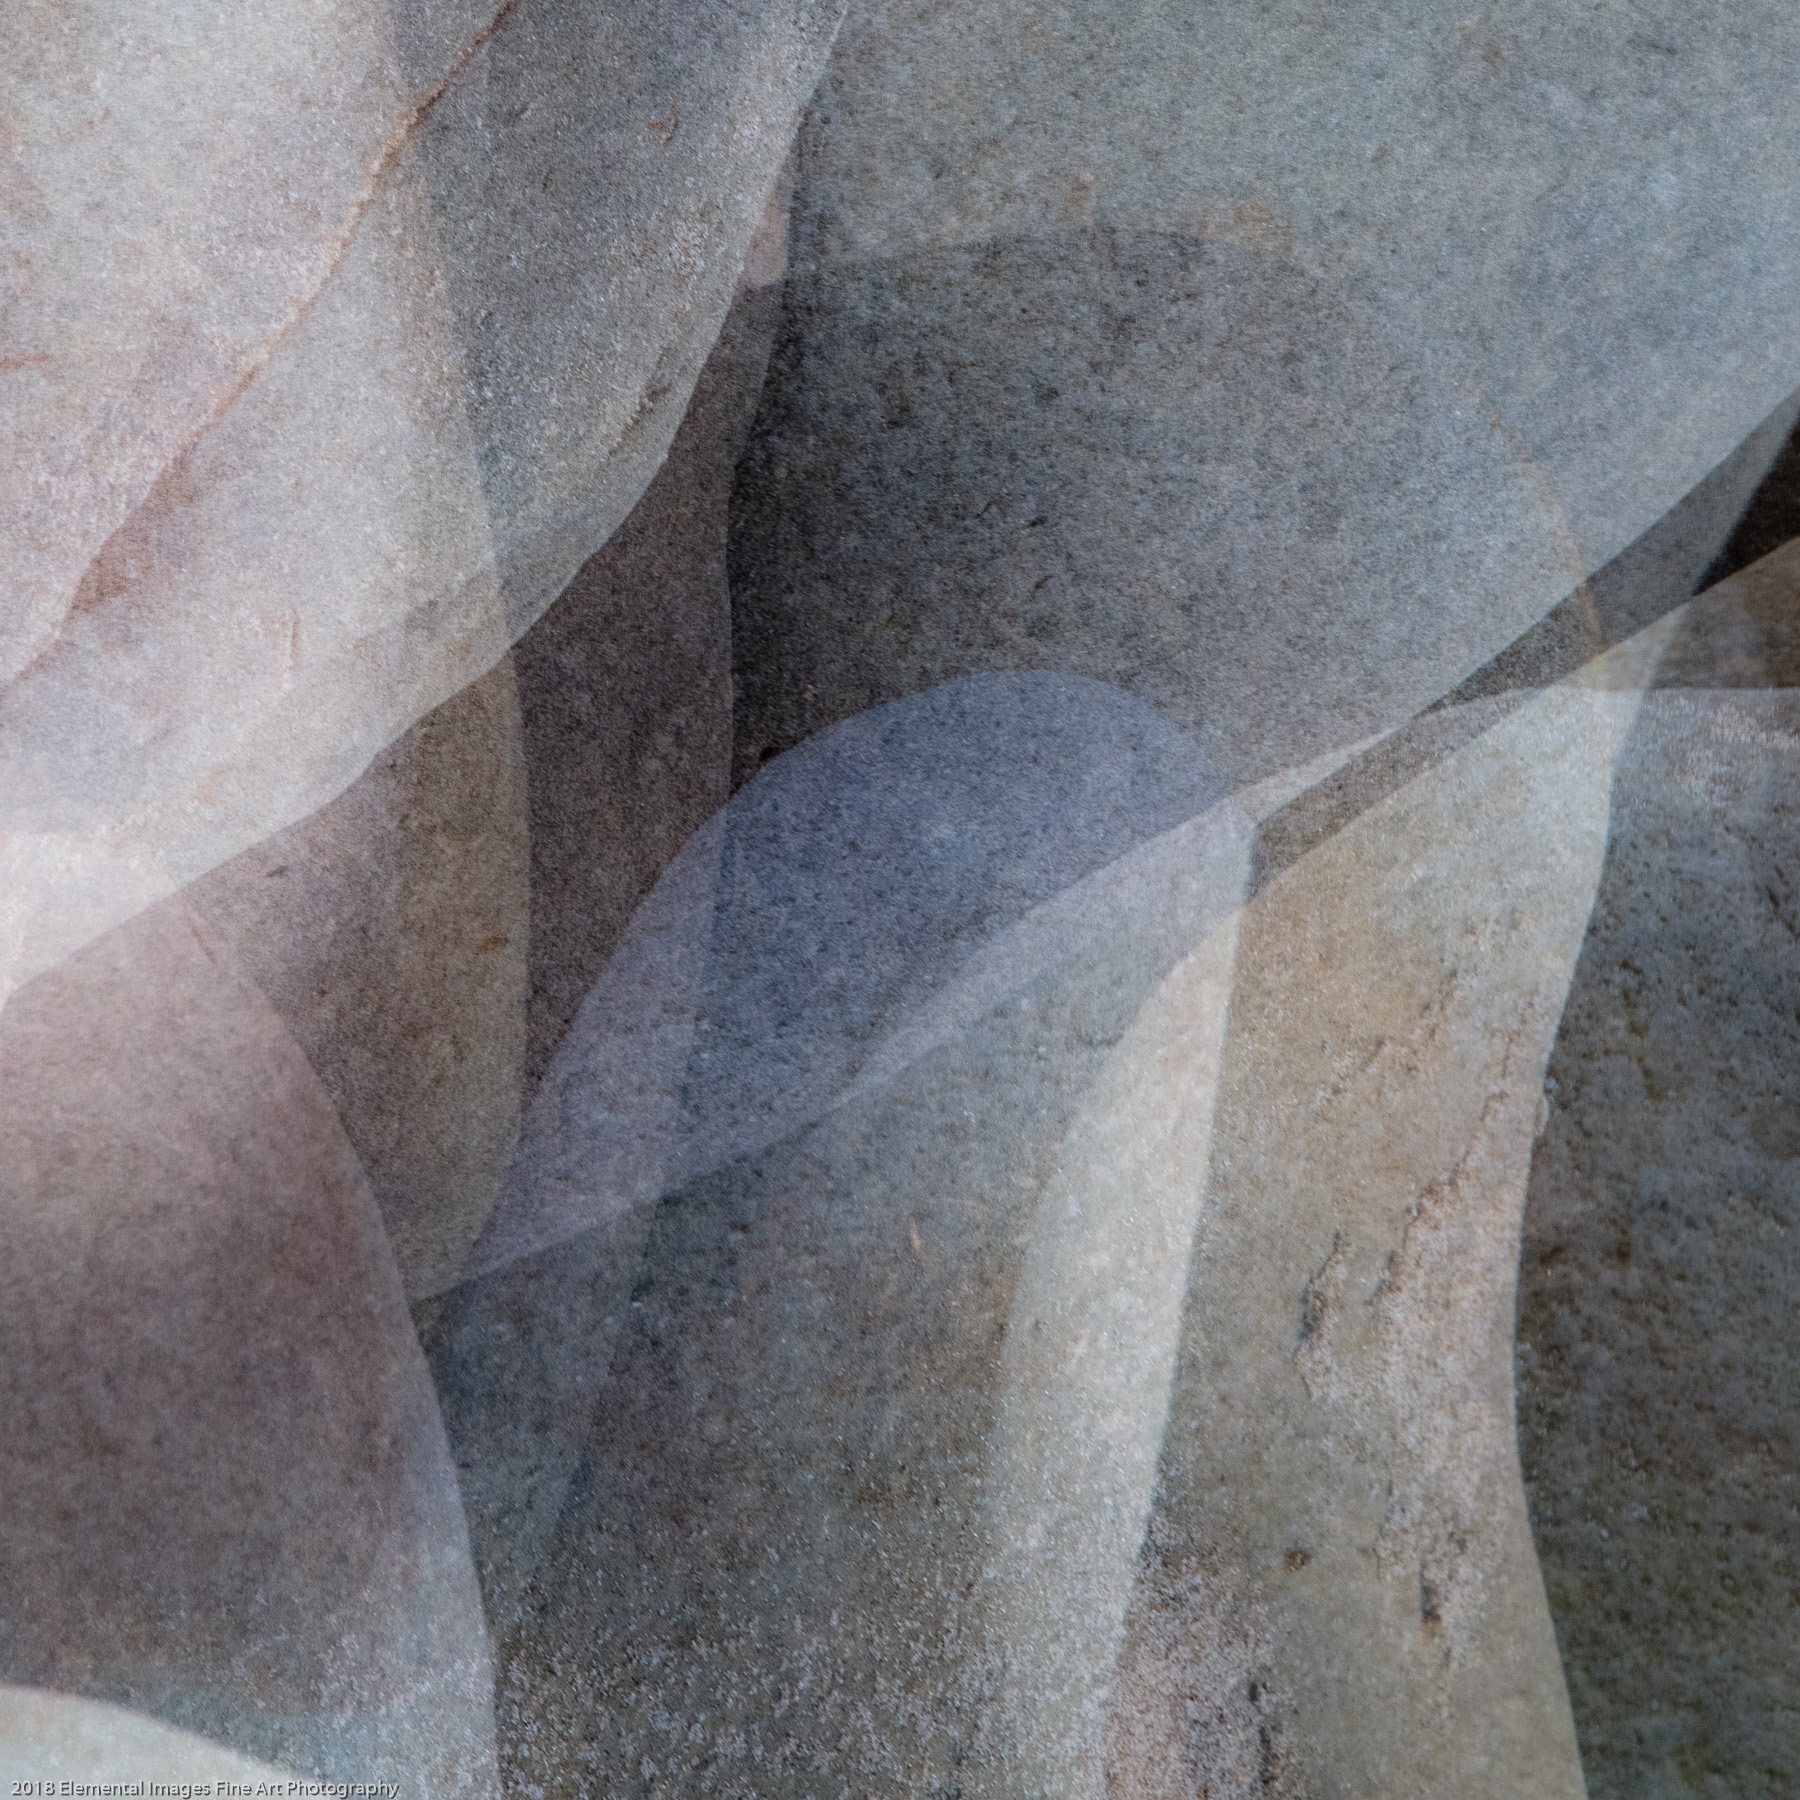 Stones #32 | Cape Meares | OR | USA - © 2018 Elemental Images Fine Art Photography - All Rights Reserved Worldwide